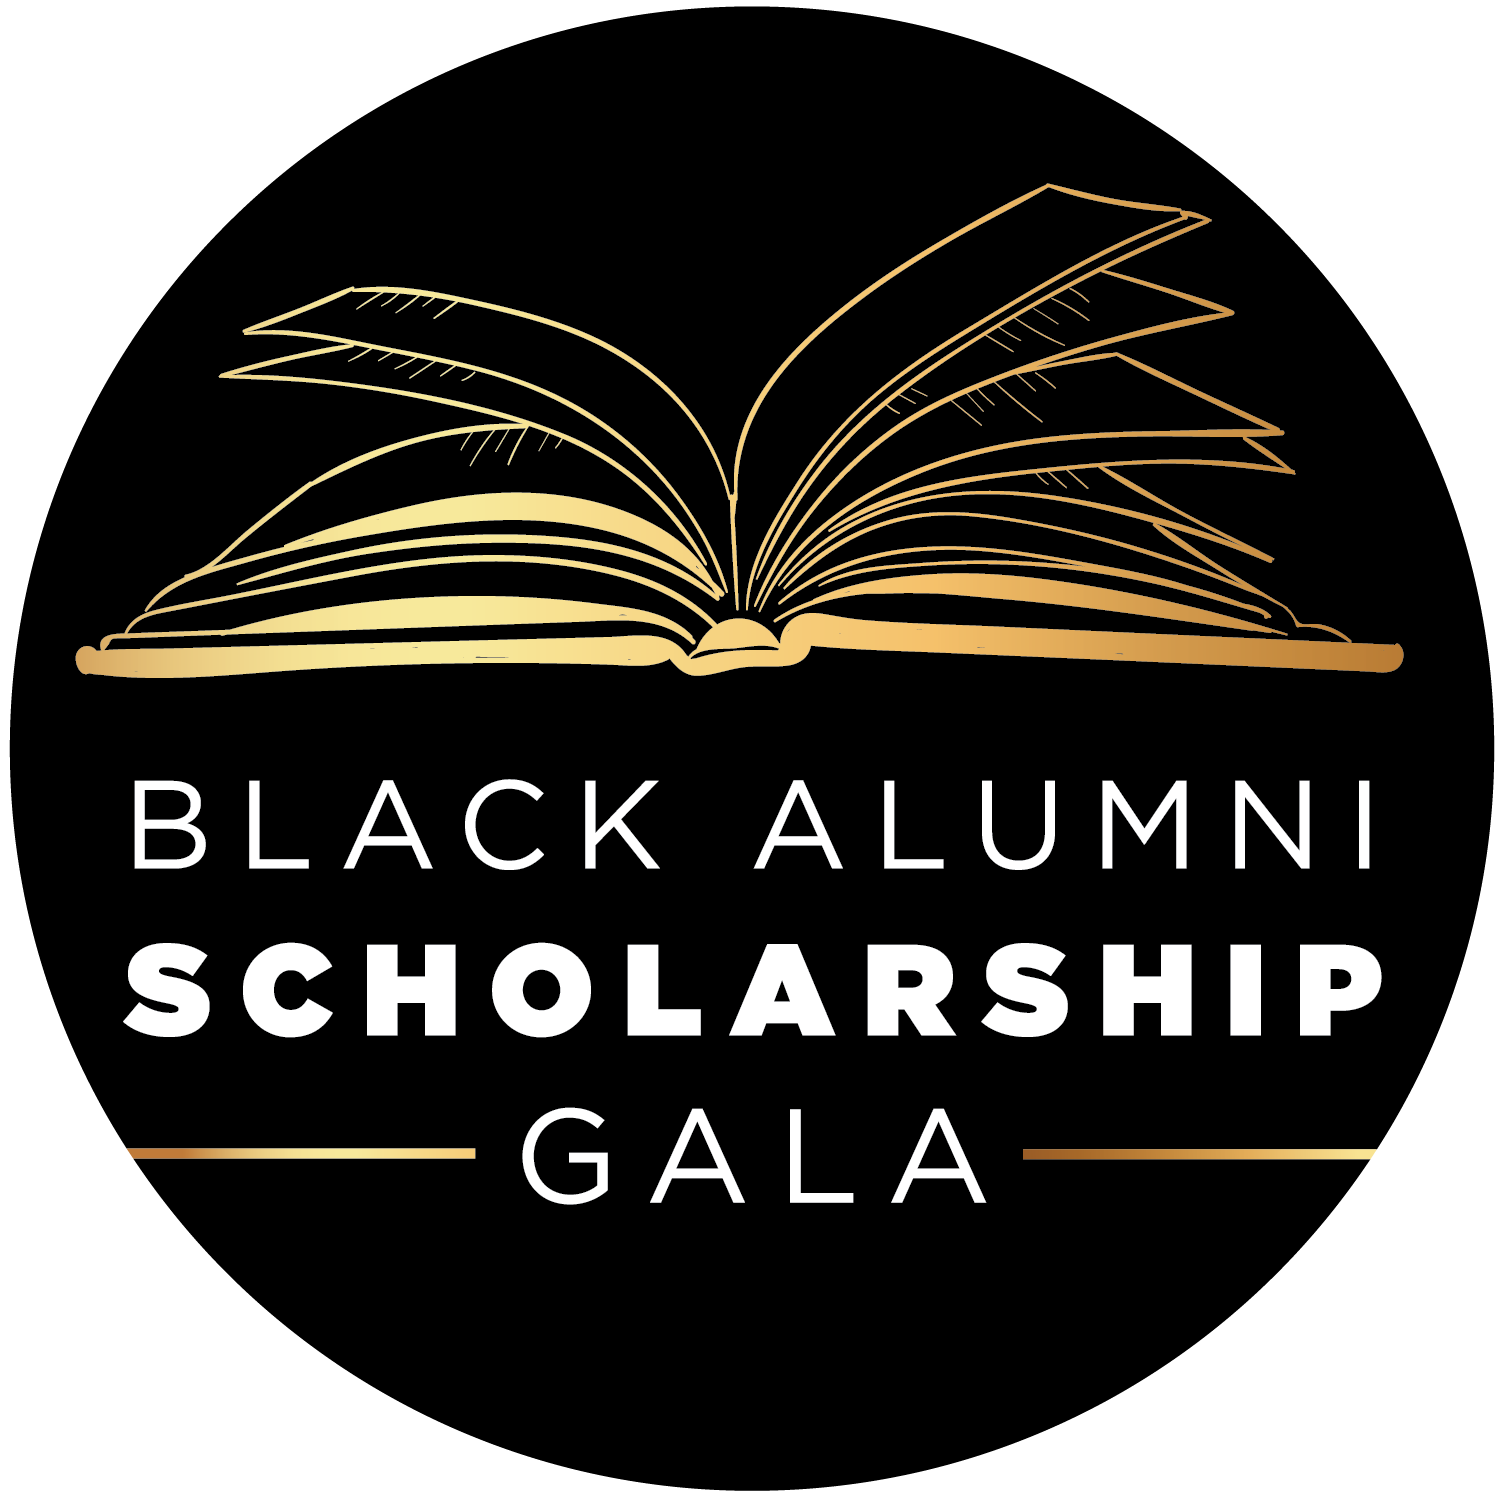 Logo for the Black Alumni Scholarship Gala showing a stylized open book